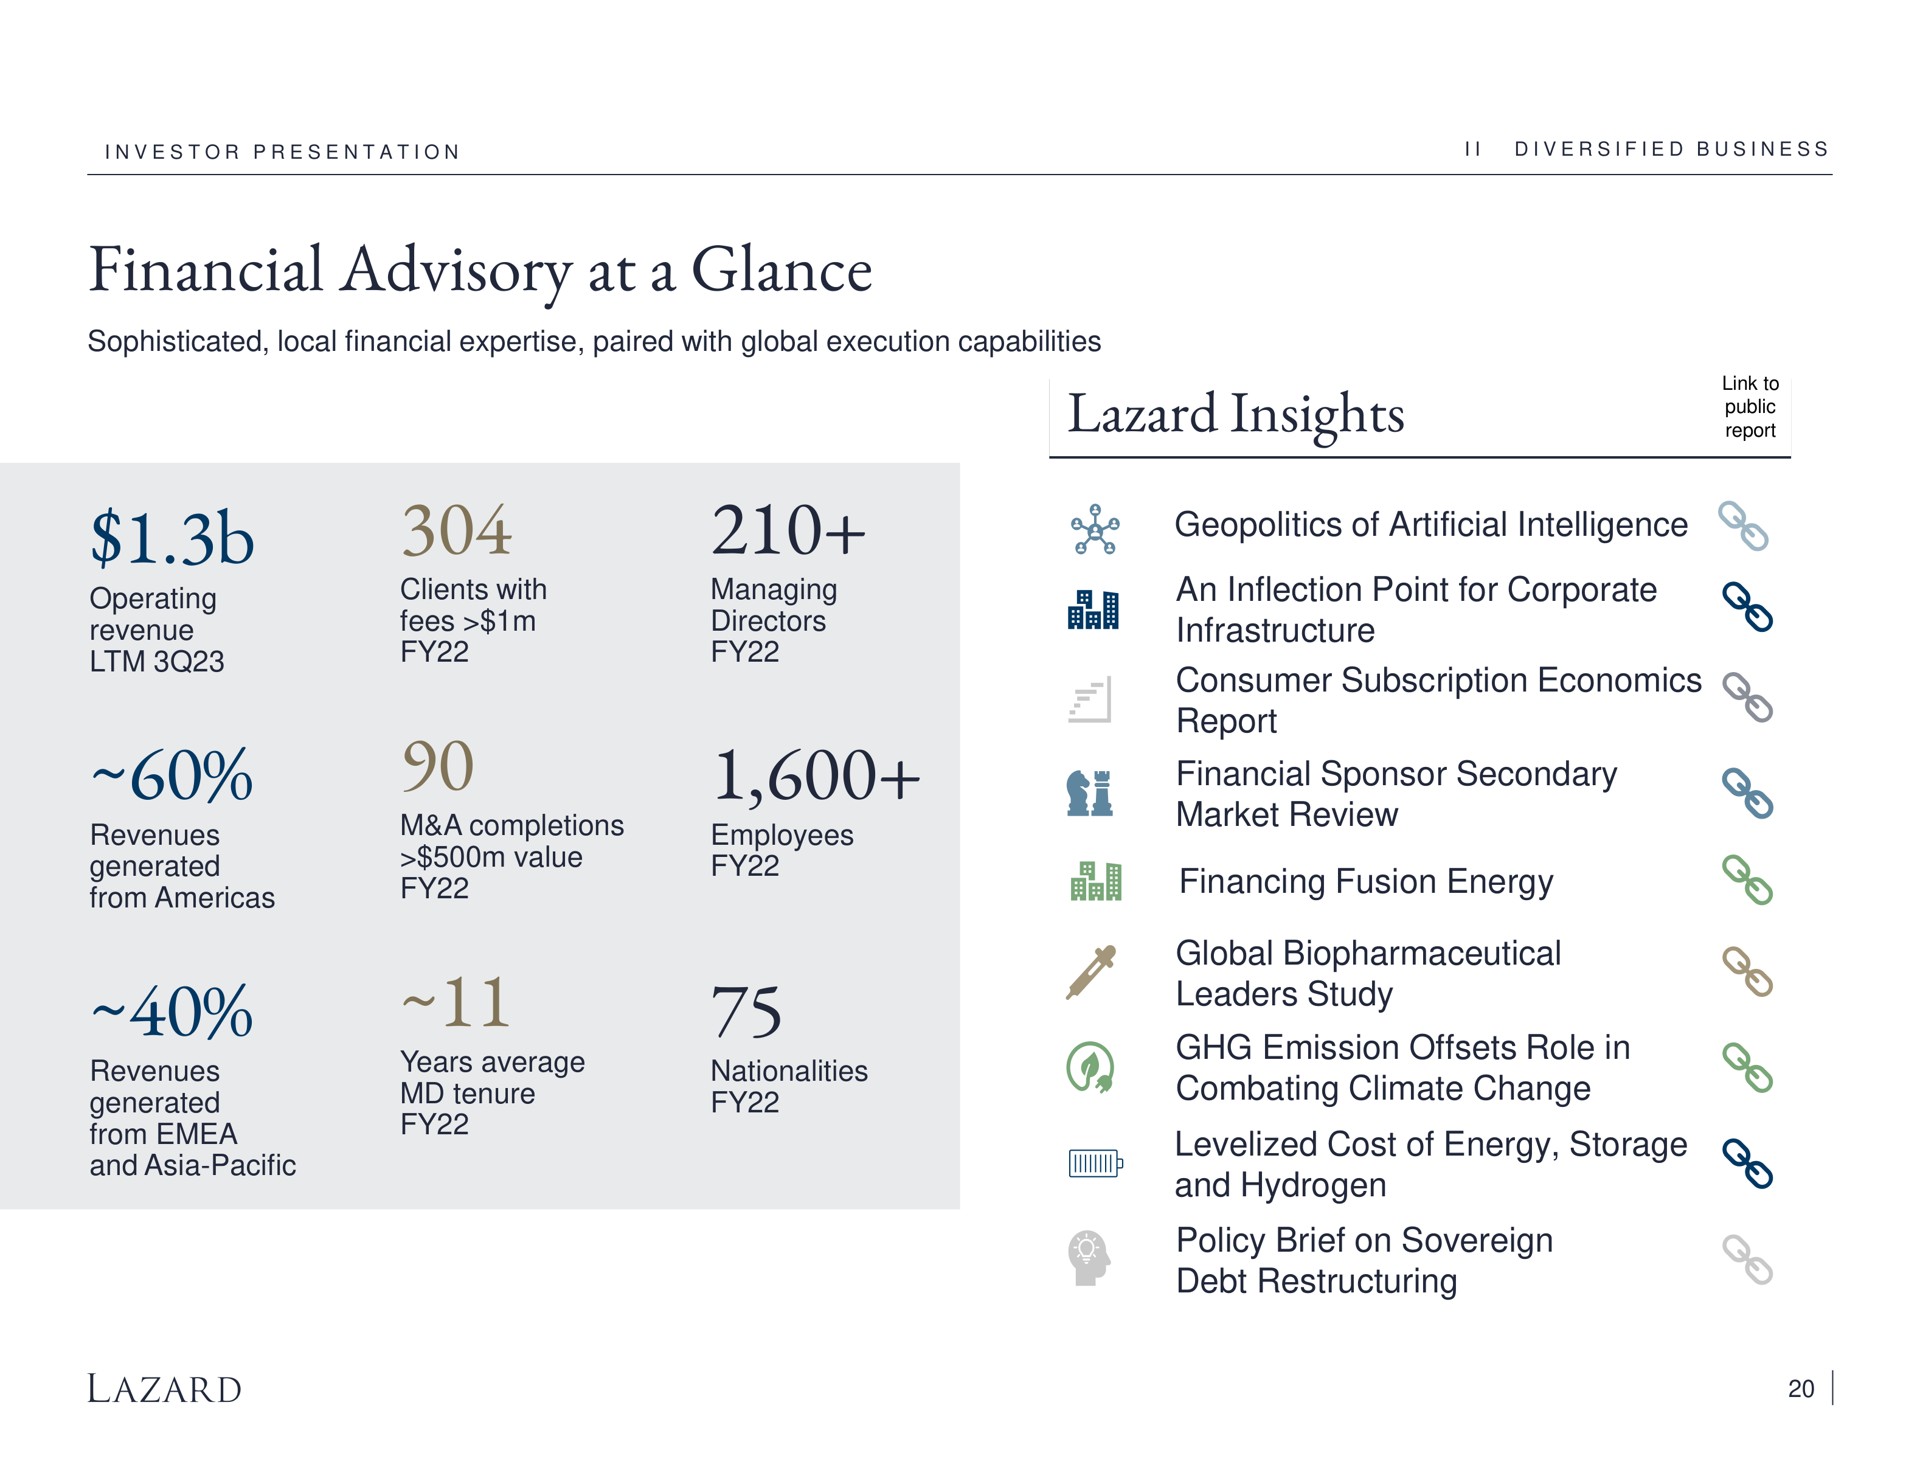 financial advisory at a glance insights geopolitics of artificial intelligence an inflection point for corporate infrastructure consumer subscription economics report financial sponsor secondary market review financing fusion energy global leaders study emission offsets role in combating climate change cost of energy storage and hydrogen policy brief on sovereign debt operating revenue clients with managing yee sere ope from che | Lazard